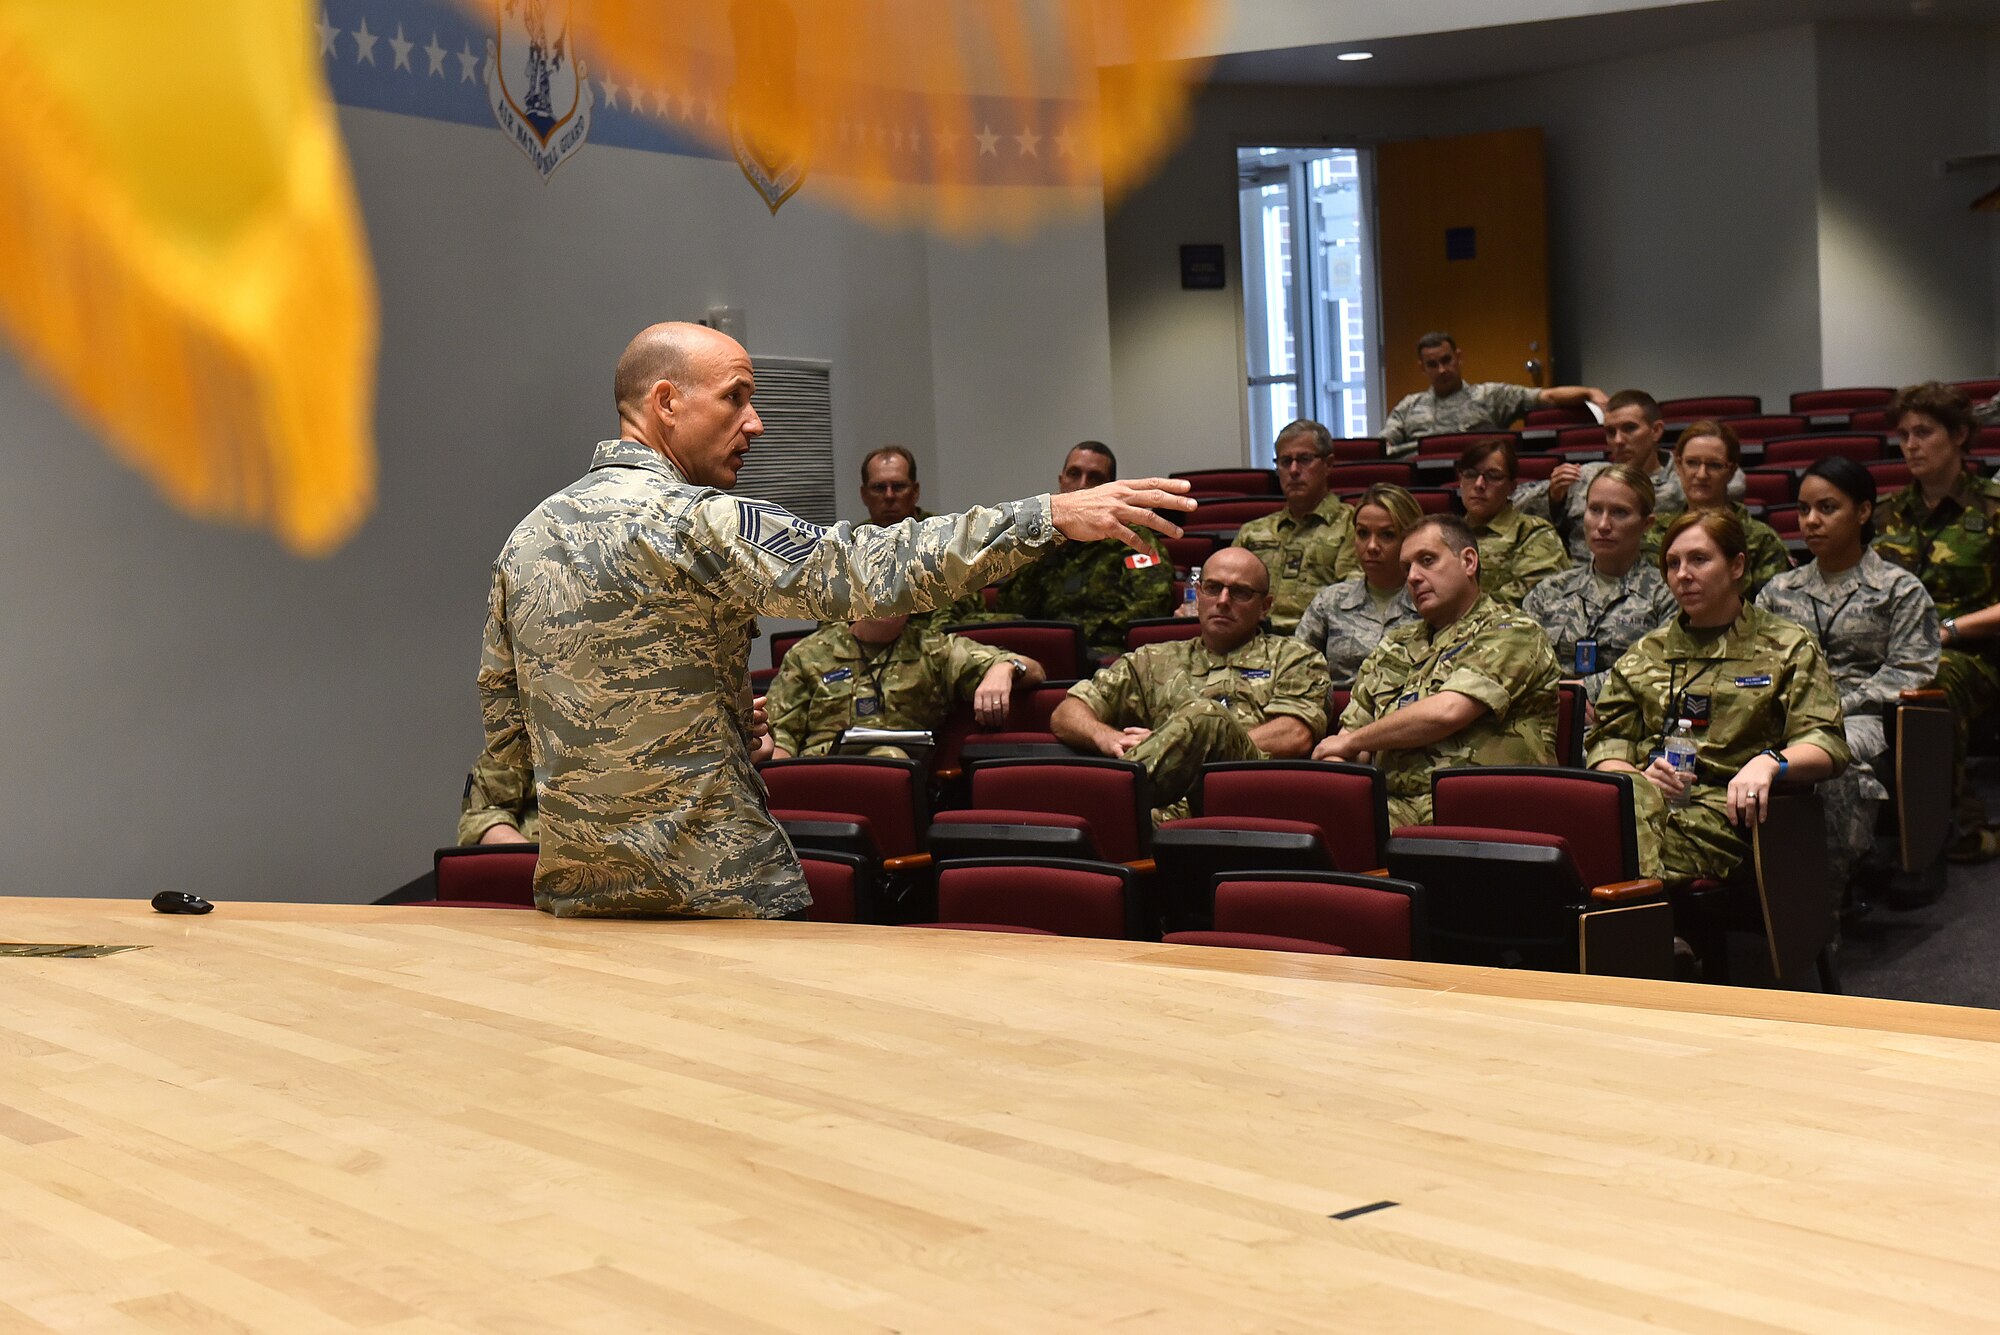 Chief Master Sgt. Edward Walden Sr., assigned to the I.G. Brown Training and Education Center, talks about the U.S. Air National Guard, Sept. 19, 2016, during the International Noncommissioned Officer Enlisted Leadership Development Seminar at McGhee Tyson Air National Guard Base in Louisville, Tenn. This year's INLEAD includes 39 NCOs from the United States, United Kingdom, Canada, Germany, Netherlands and Switzerland. (U.S. Air National Guard photo by Master Sgt. Mike R. Smith)